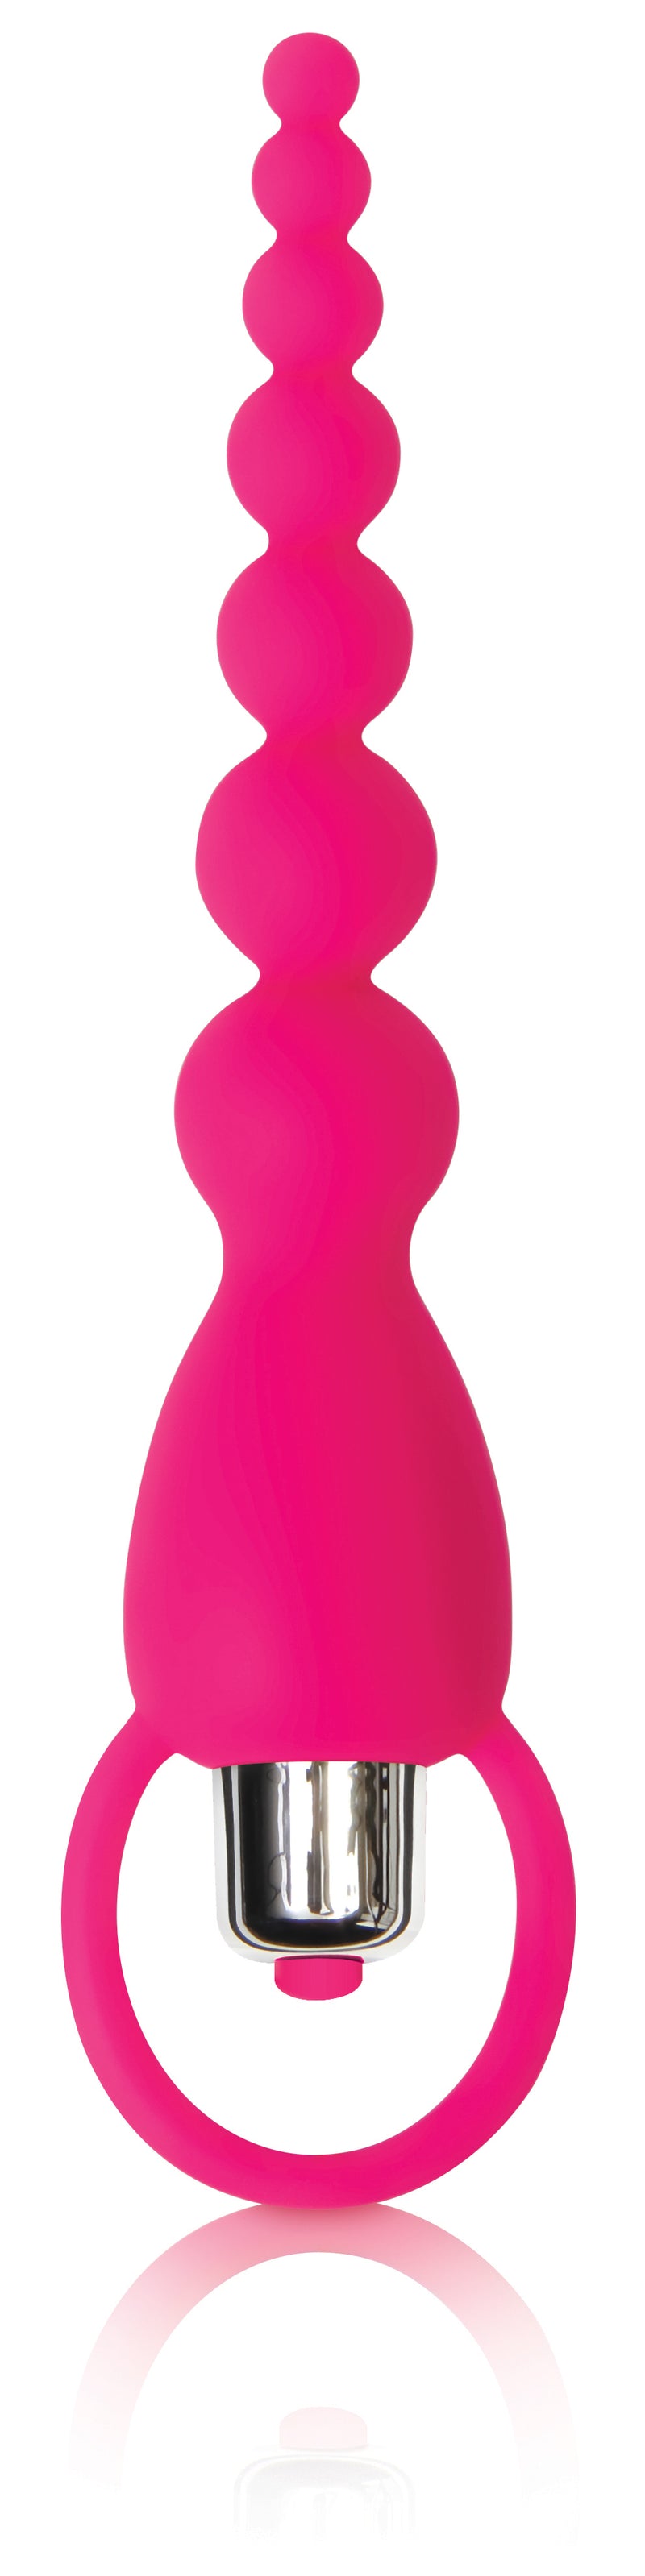 Graduated Silicone Anal Beads with Removable Vibe for Sensational Pleasure